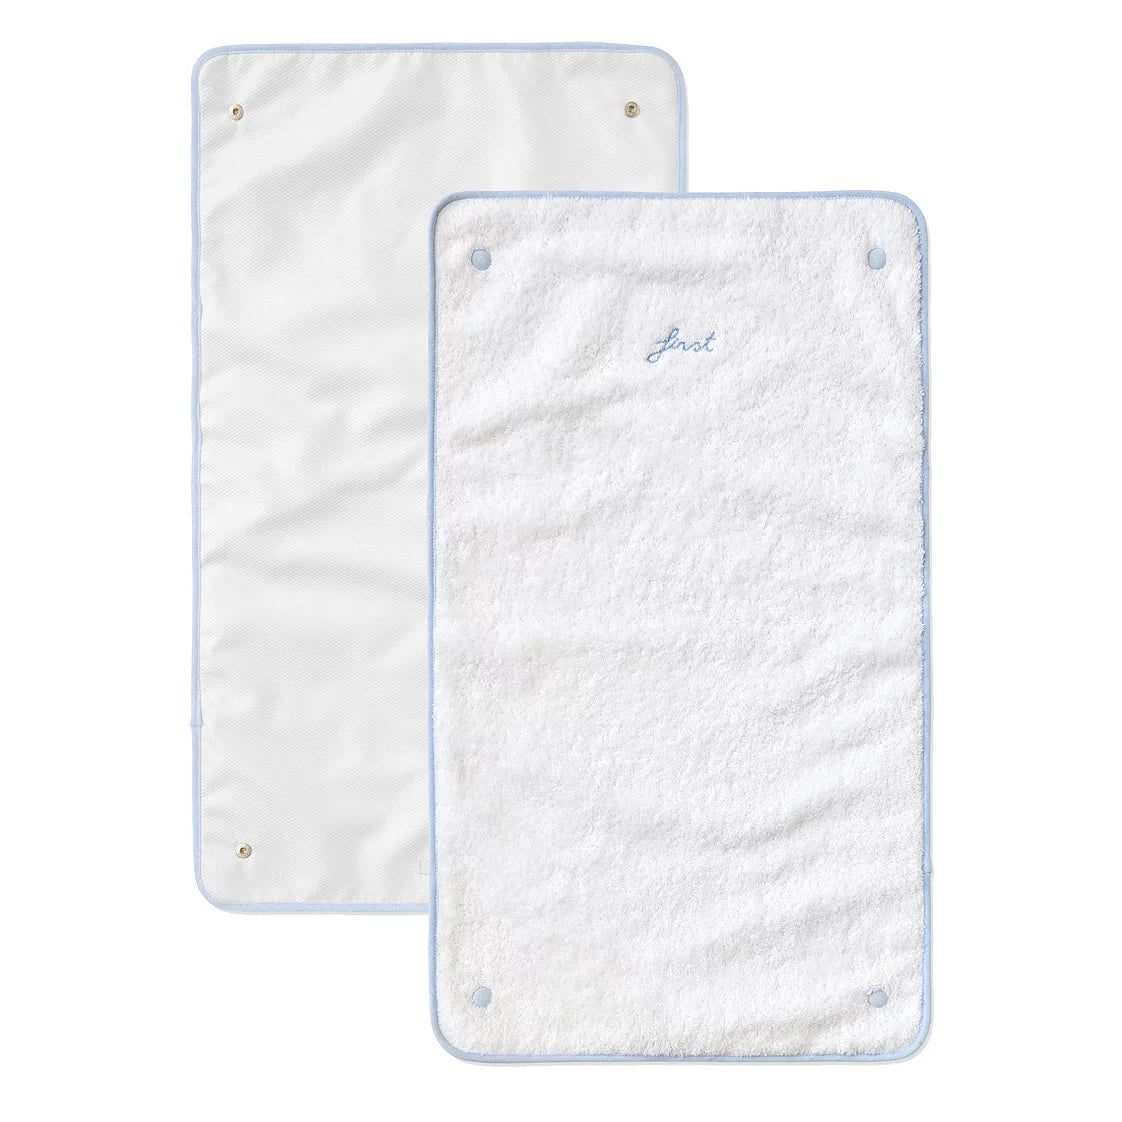 First Forever Blue Changing Pad Extra Towels